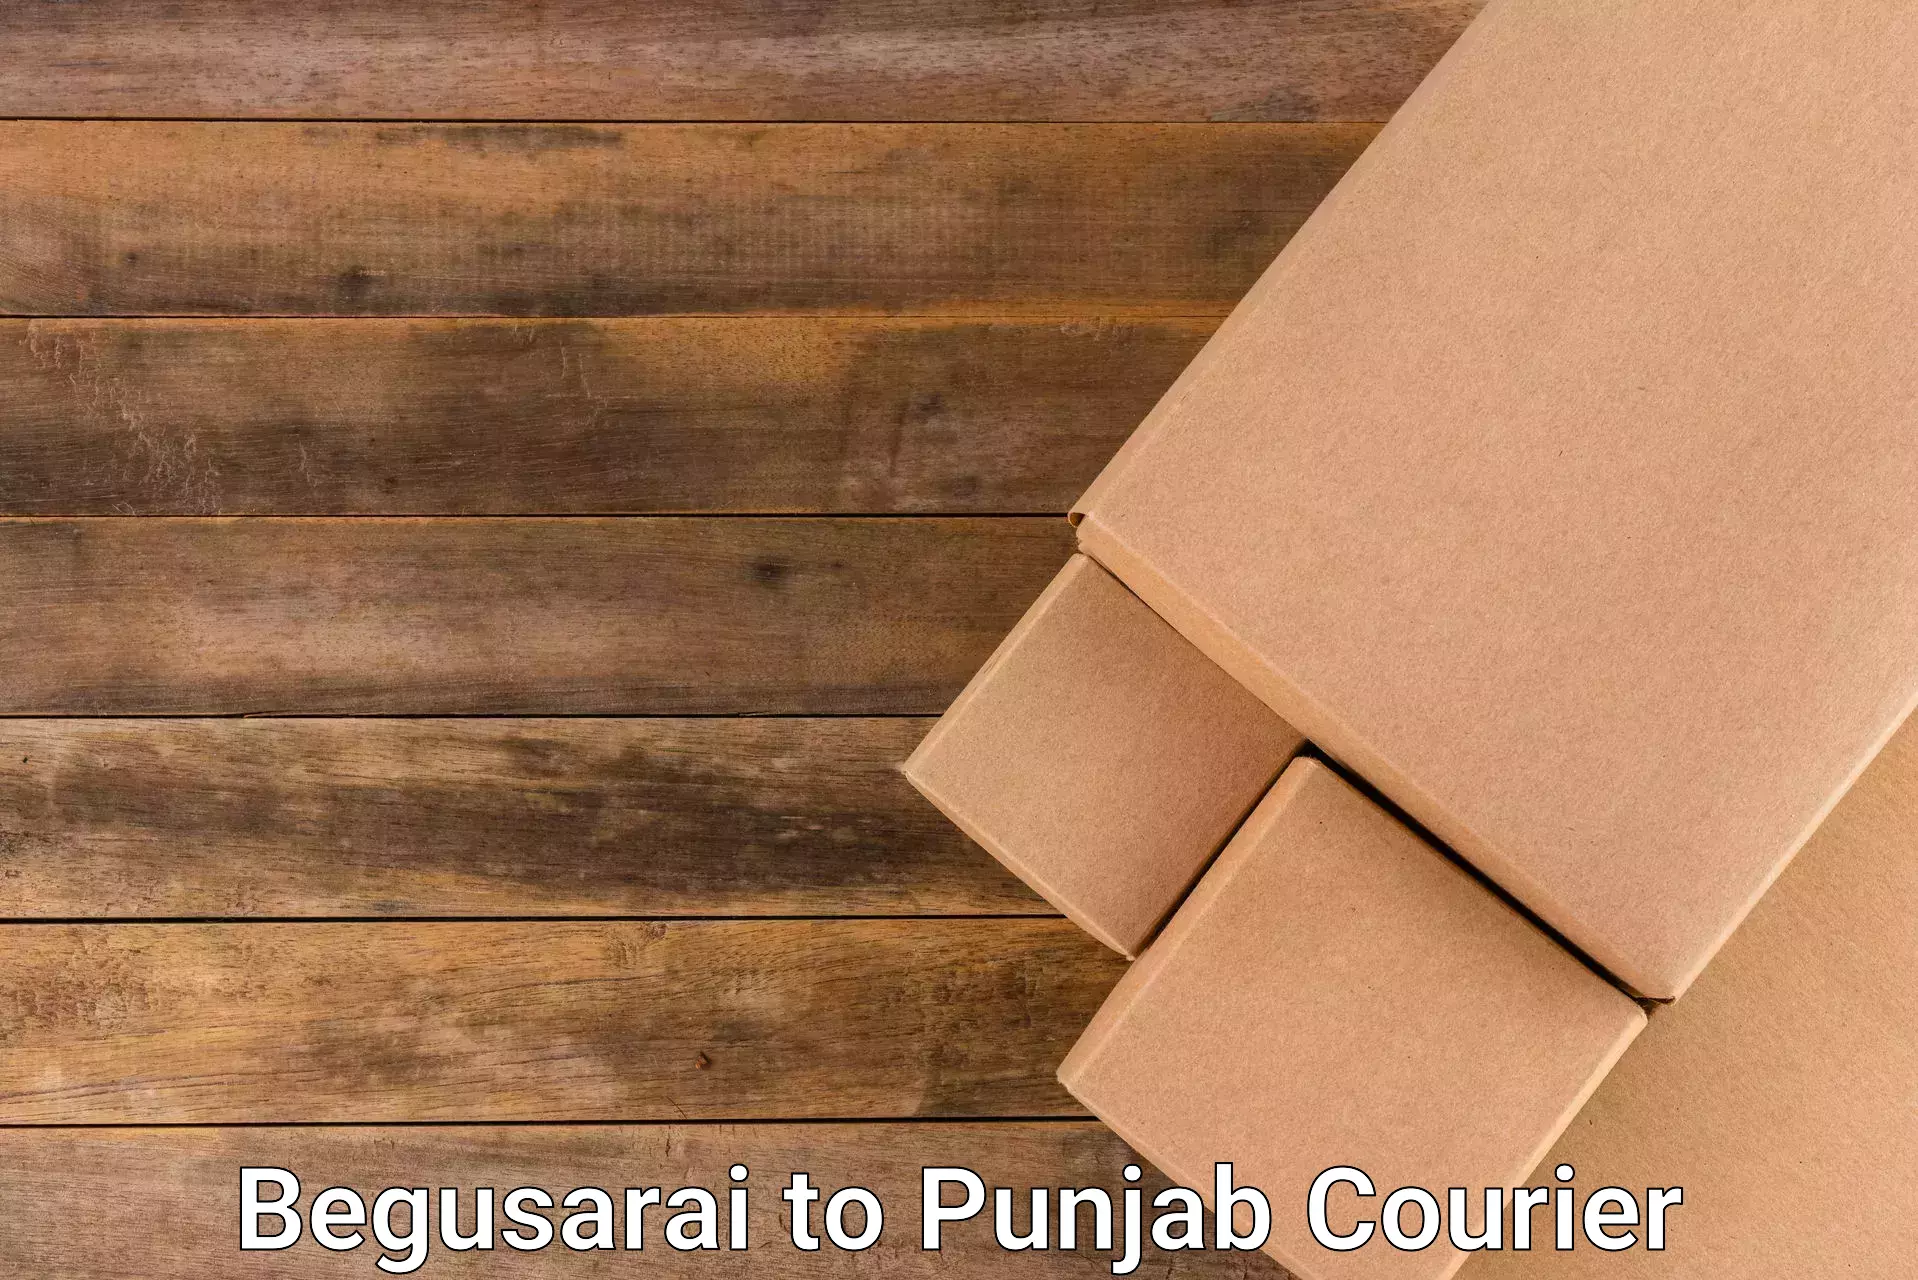 Efficient parcel delivery Begusarai to Begowal